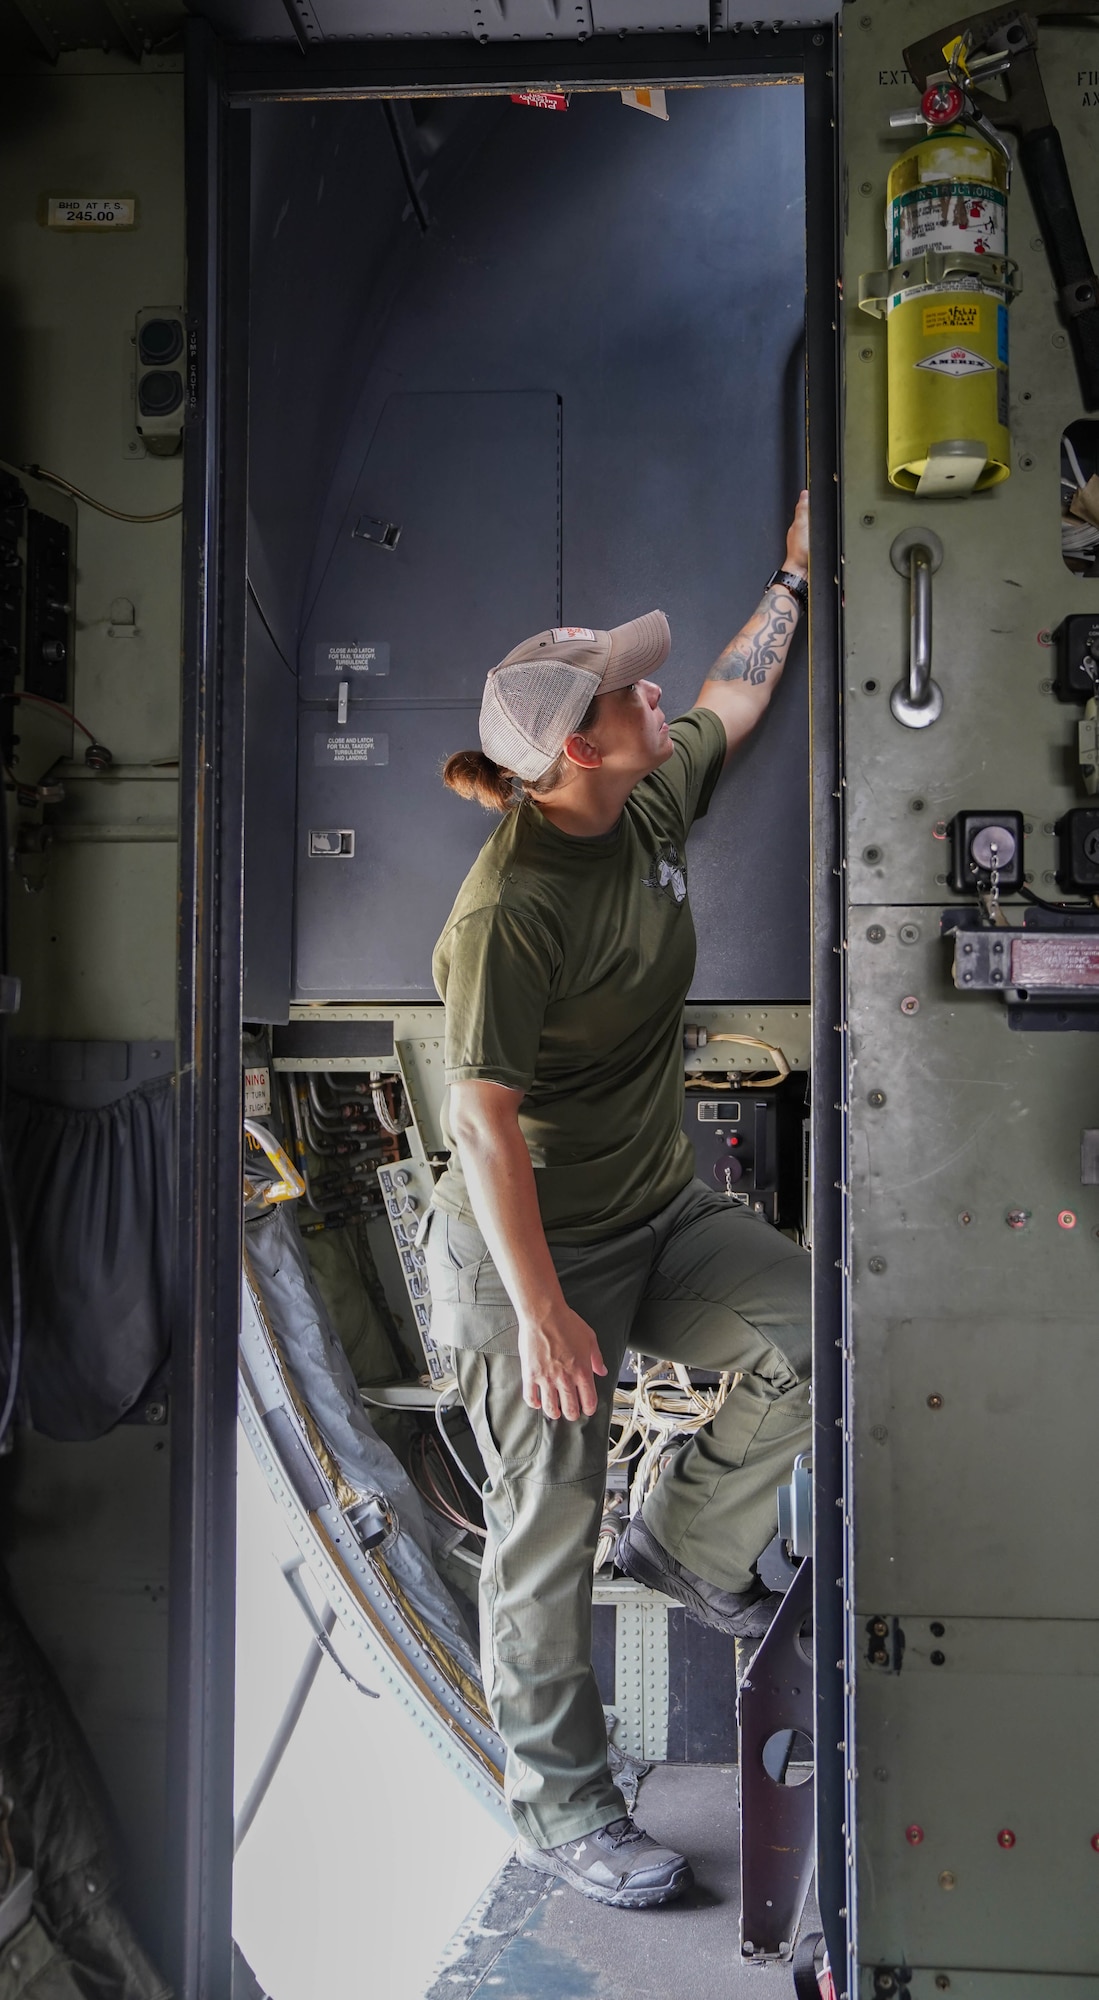 Chelsea Dean, Biloxi Special Weapons and Tactics officer, takes a tour of a C-130 during a joint training with the 81st Security Forces Squadron at Keesler Air Force Base, Mississippi, May 9, 2022. Security forces and Biloxi SWAT members trained together on aircraft anti-hijacking procedures.